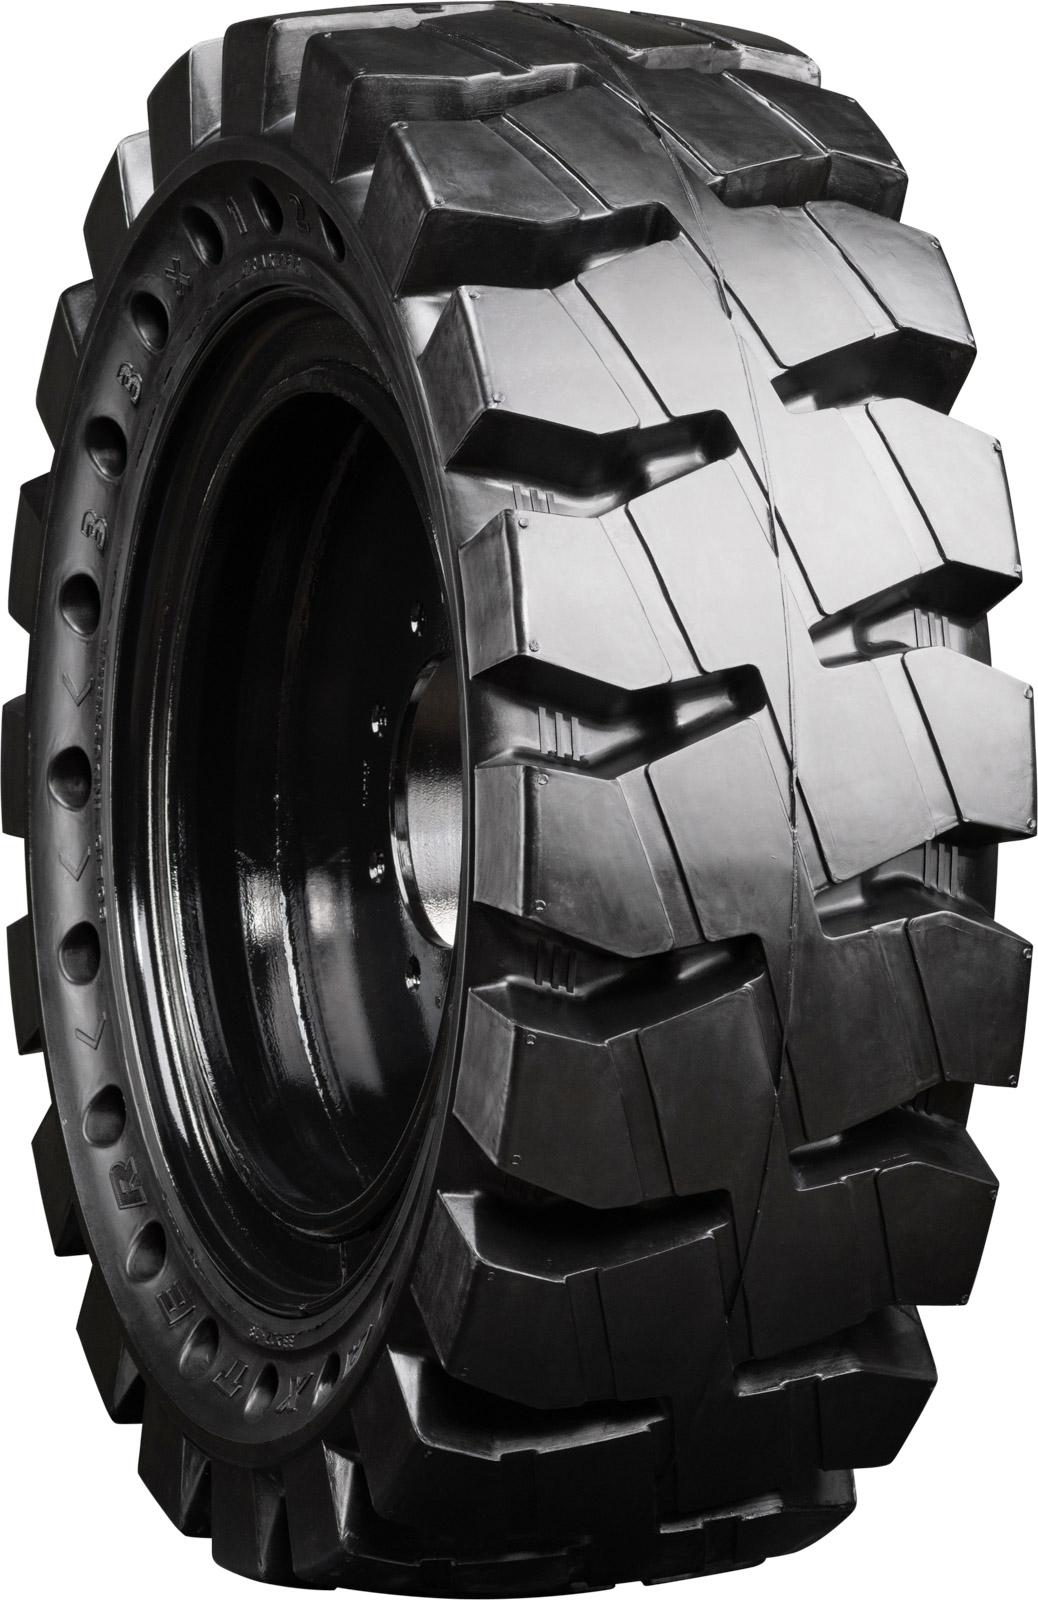 set of 4 traxter 33x12-18 (12-16.5) extreme duty non-directional solid rubber skid steer tire - 8x8 bolt rim